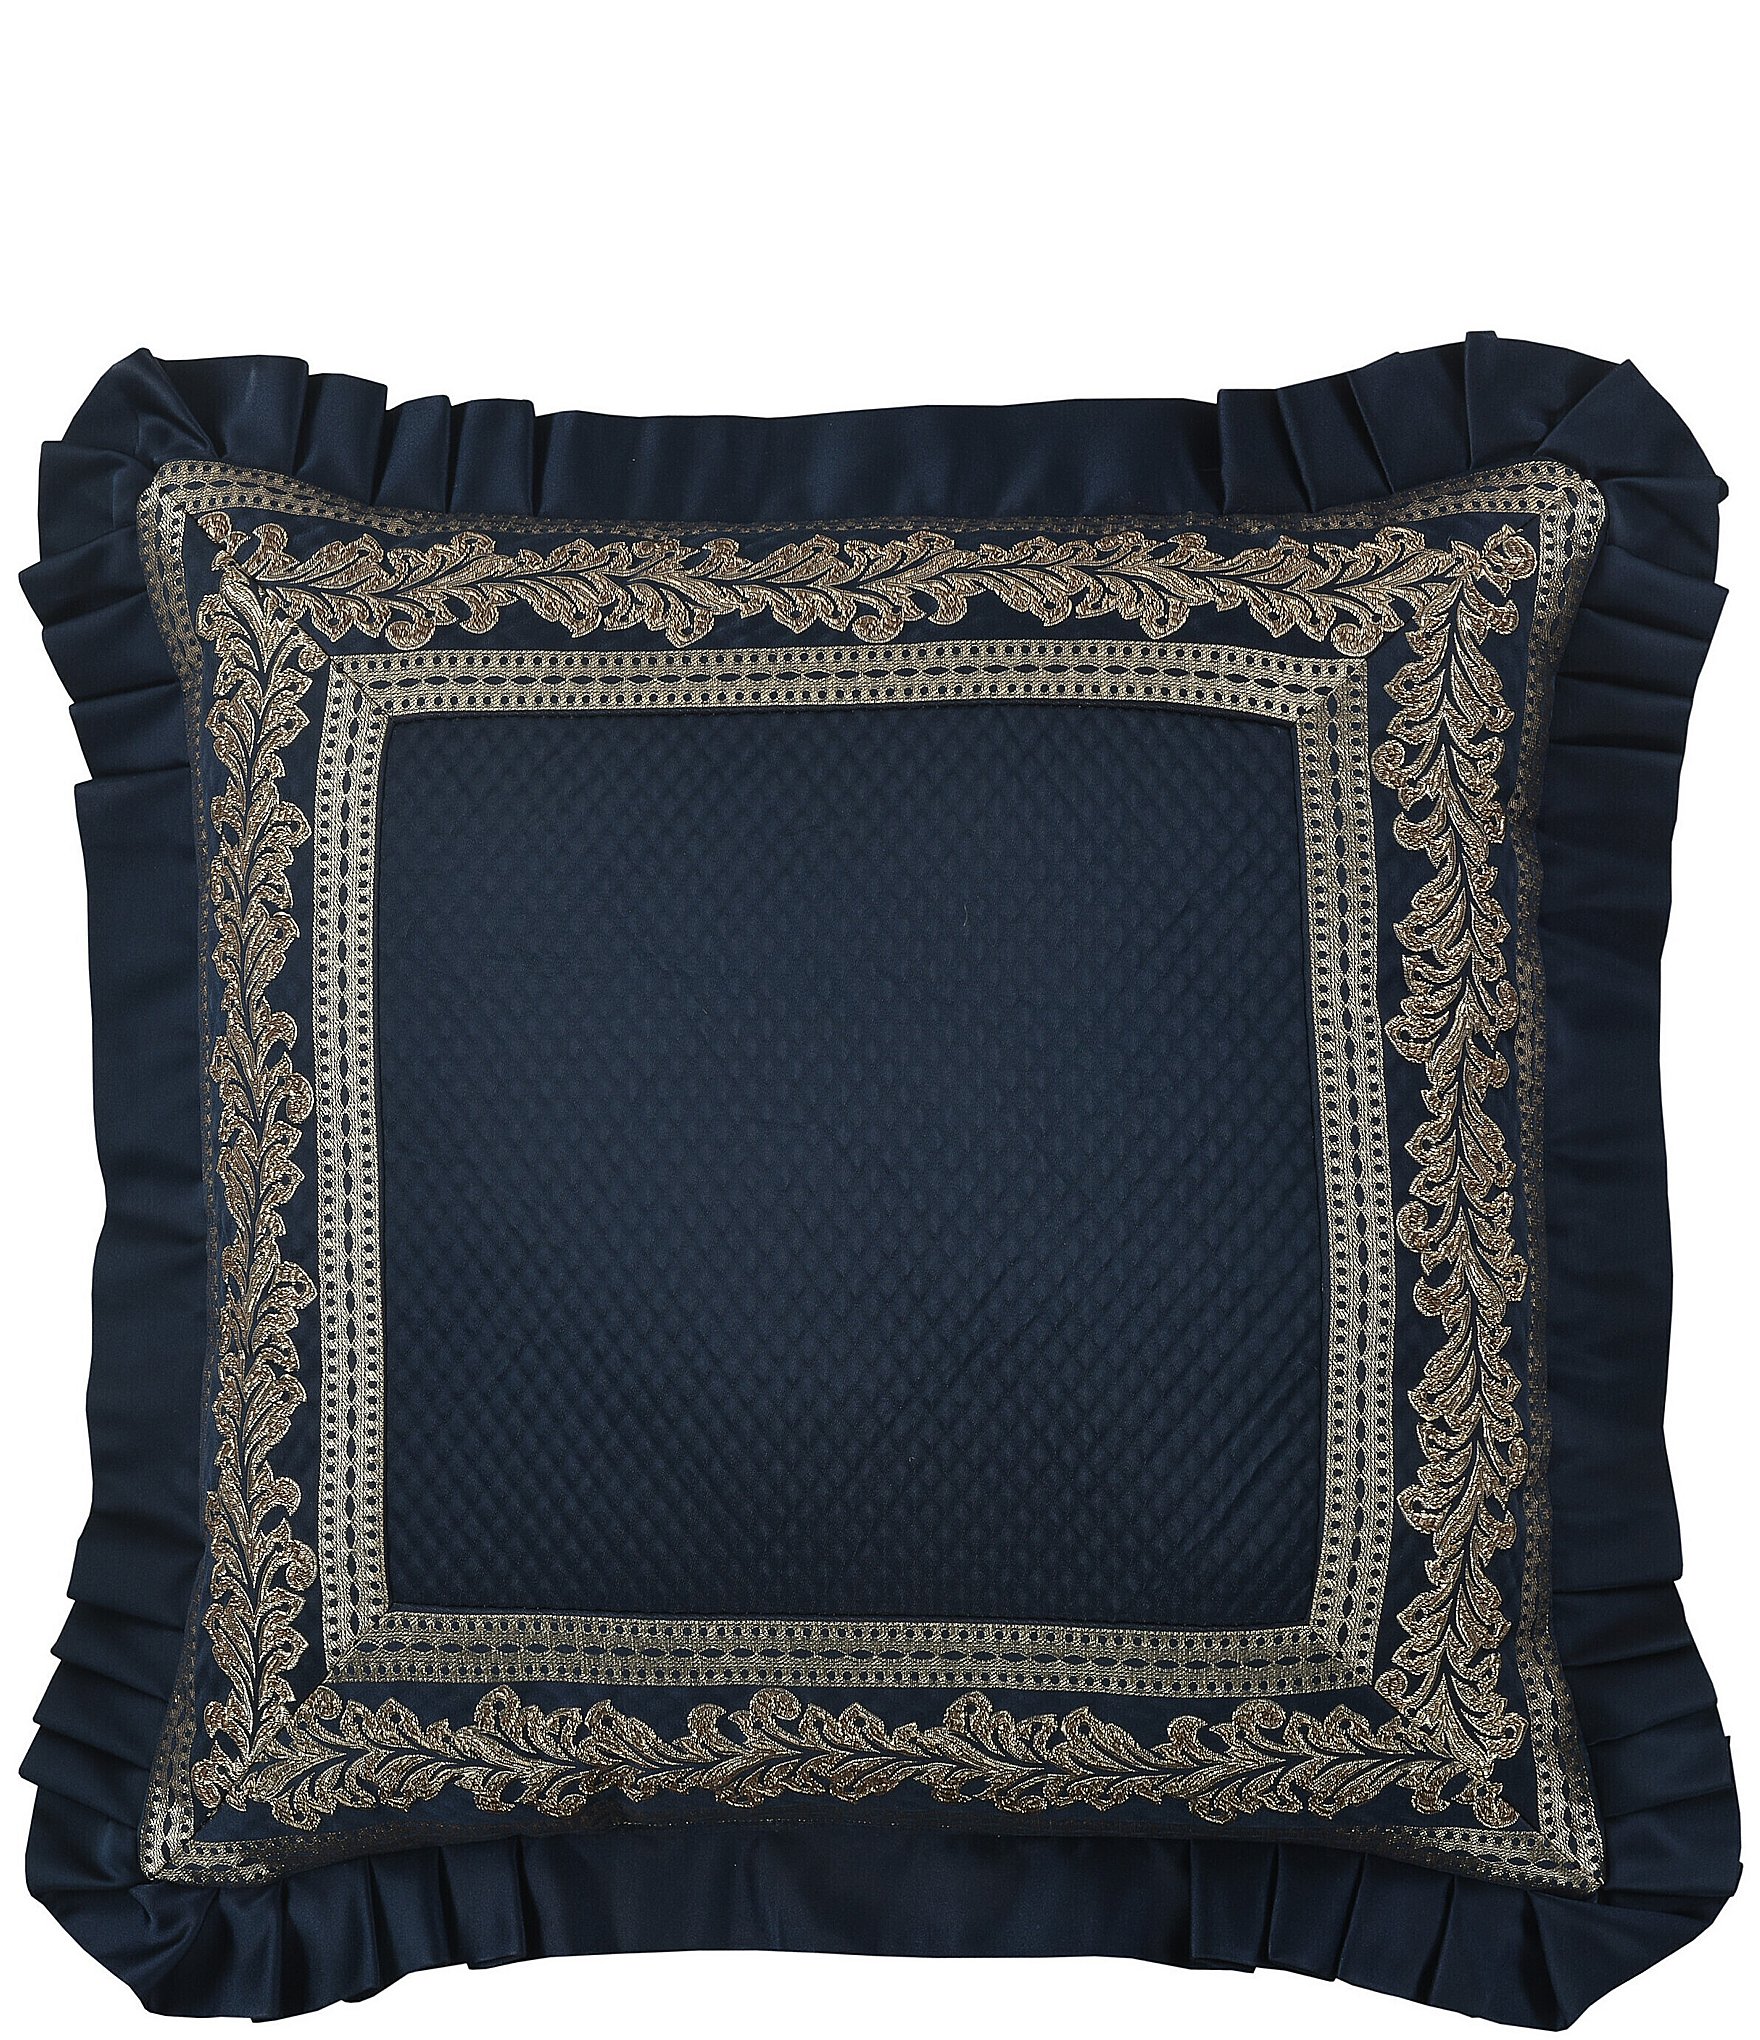 https://dimg.dillards.com/is/image/DillardsZoom/zoom/j.-queen-new-york-monte-carlo-lace-scroll-border-embellished-square-pillow/00000000_zi_3de47fd1-2cac-449e-b465-a1a841f9ae64.jpg